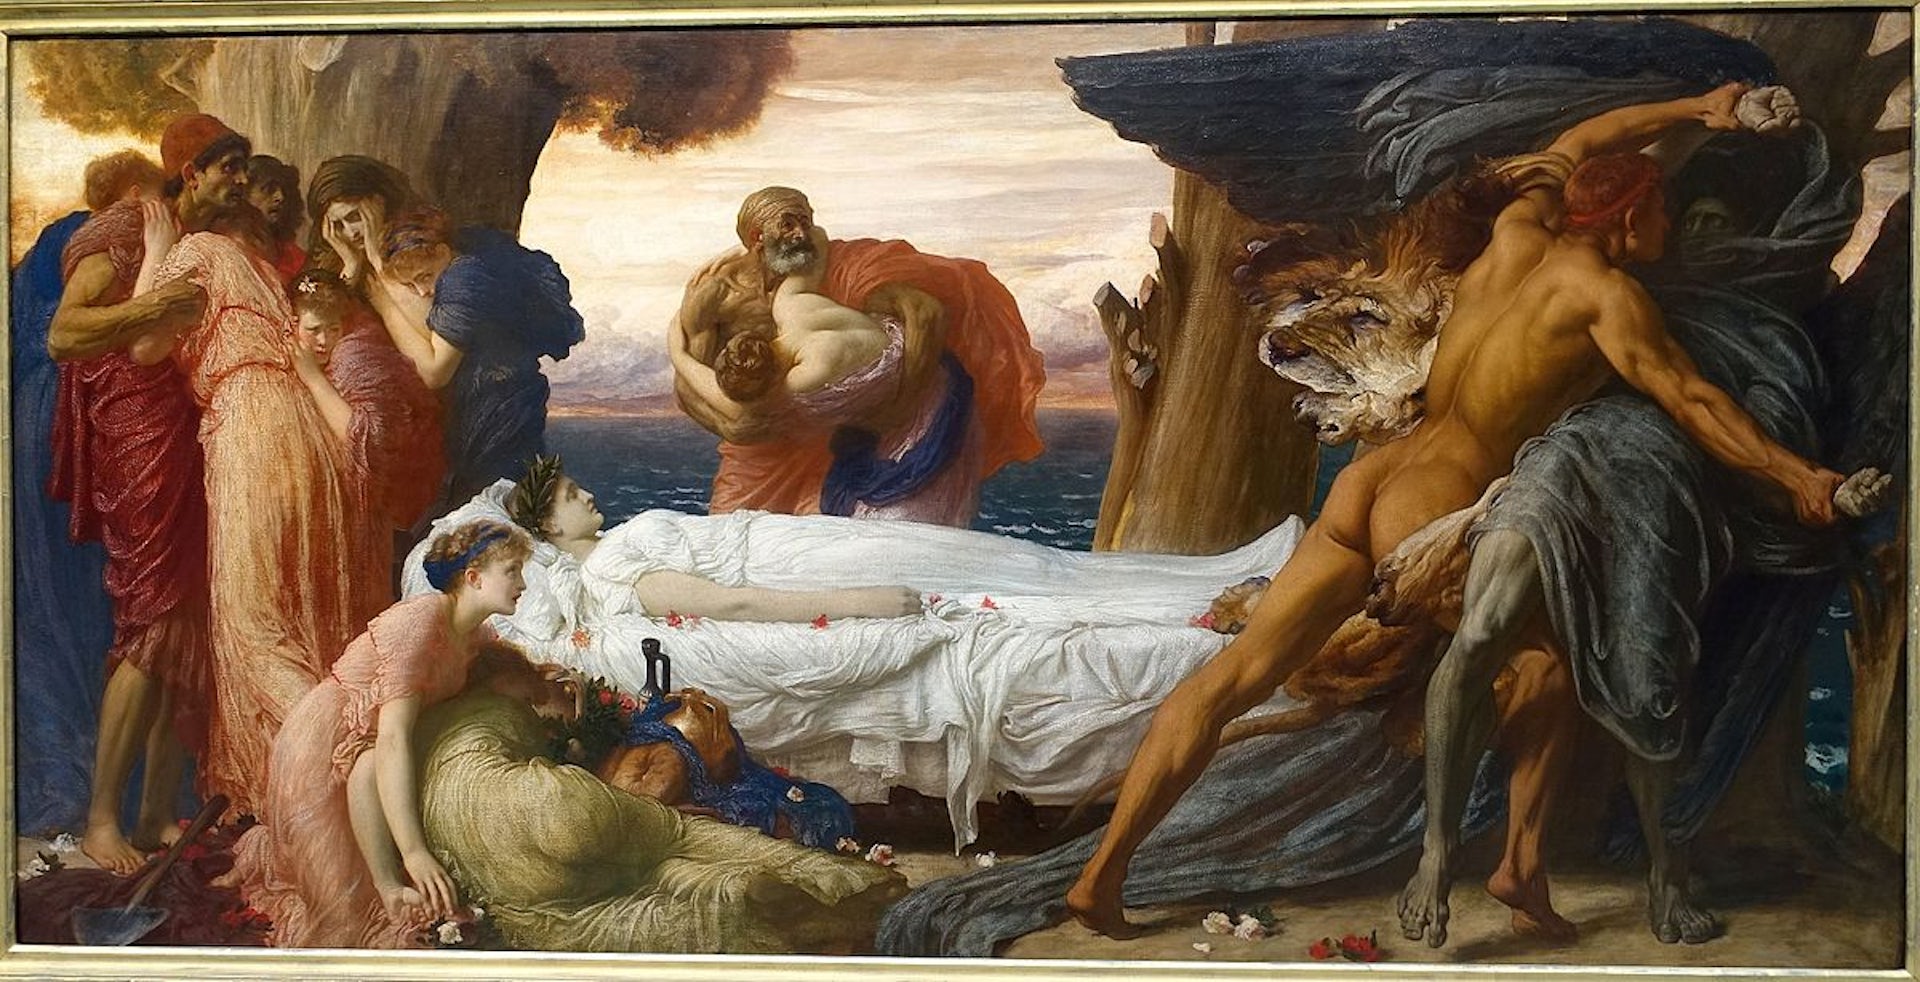 Hercules Wrestling with Death for the Body of Alcestis, by Frederic Lord Leighton, England, c. 1869-1871